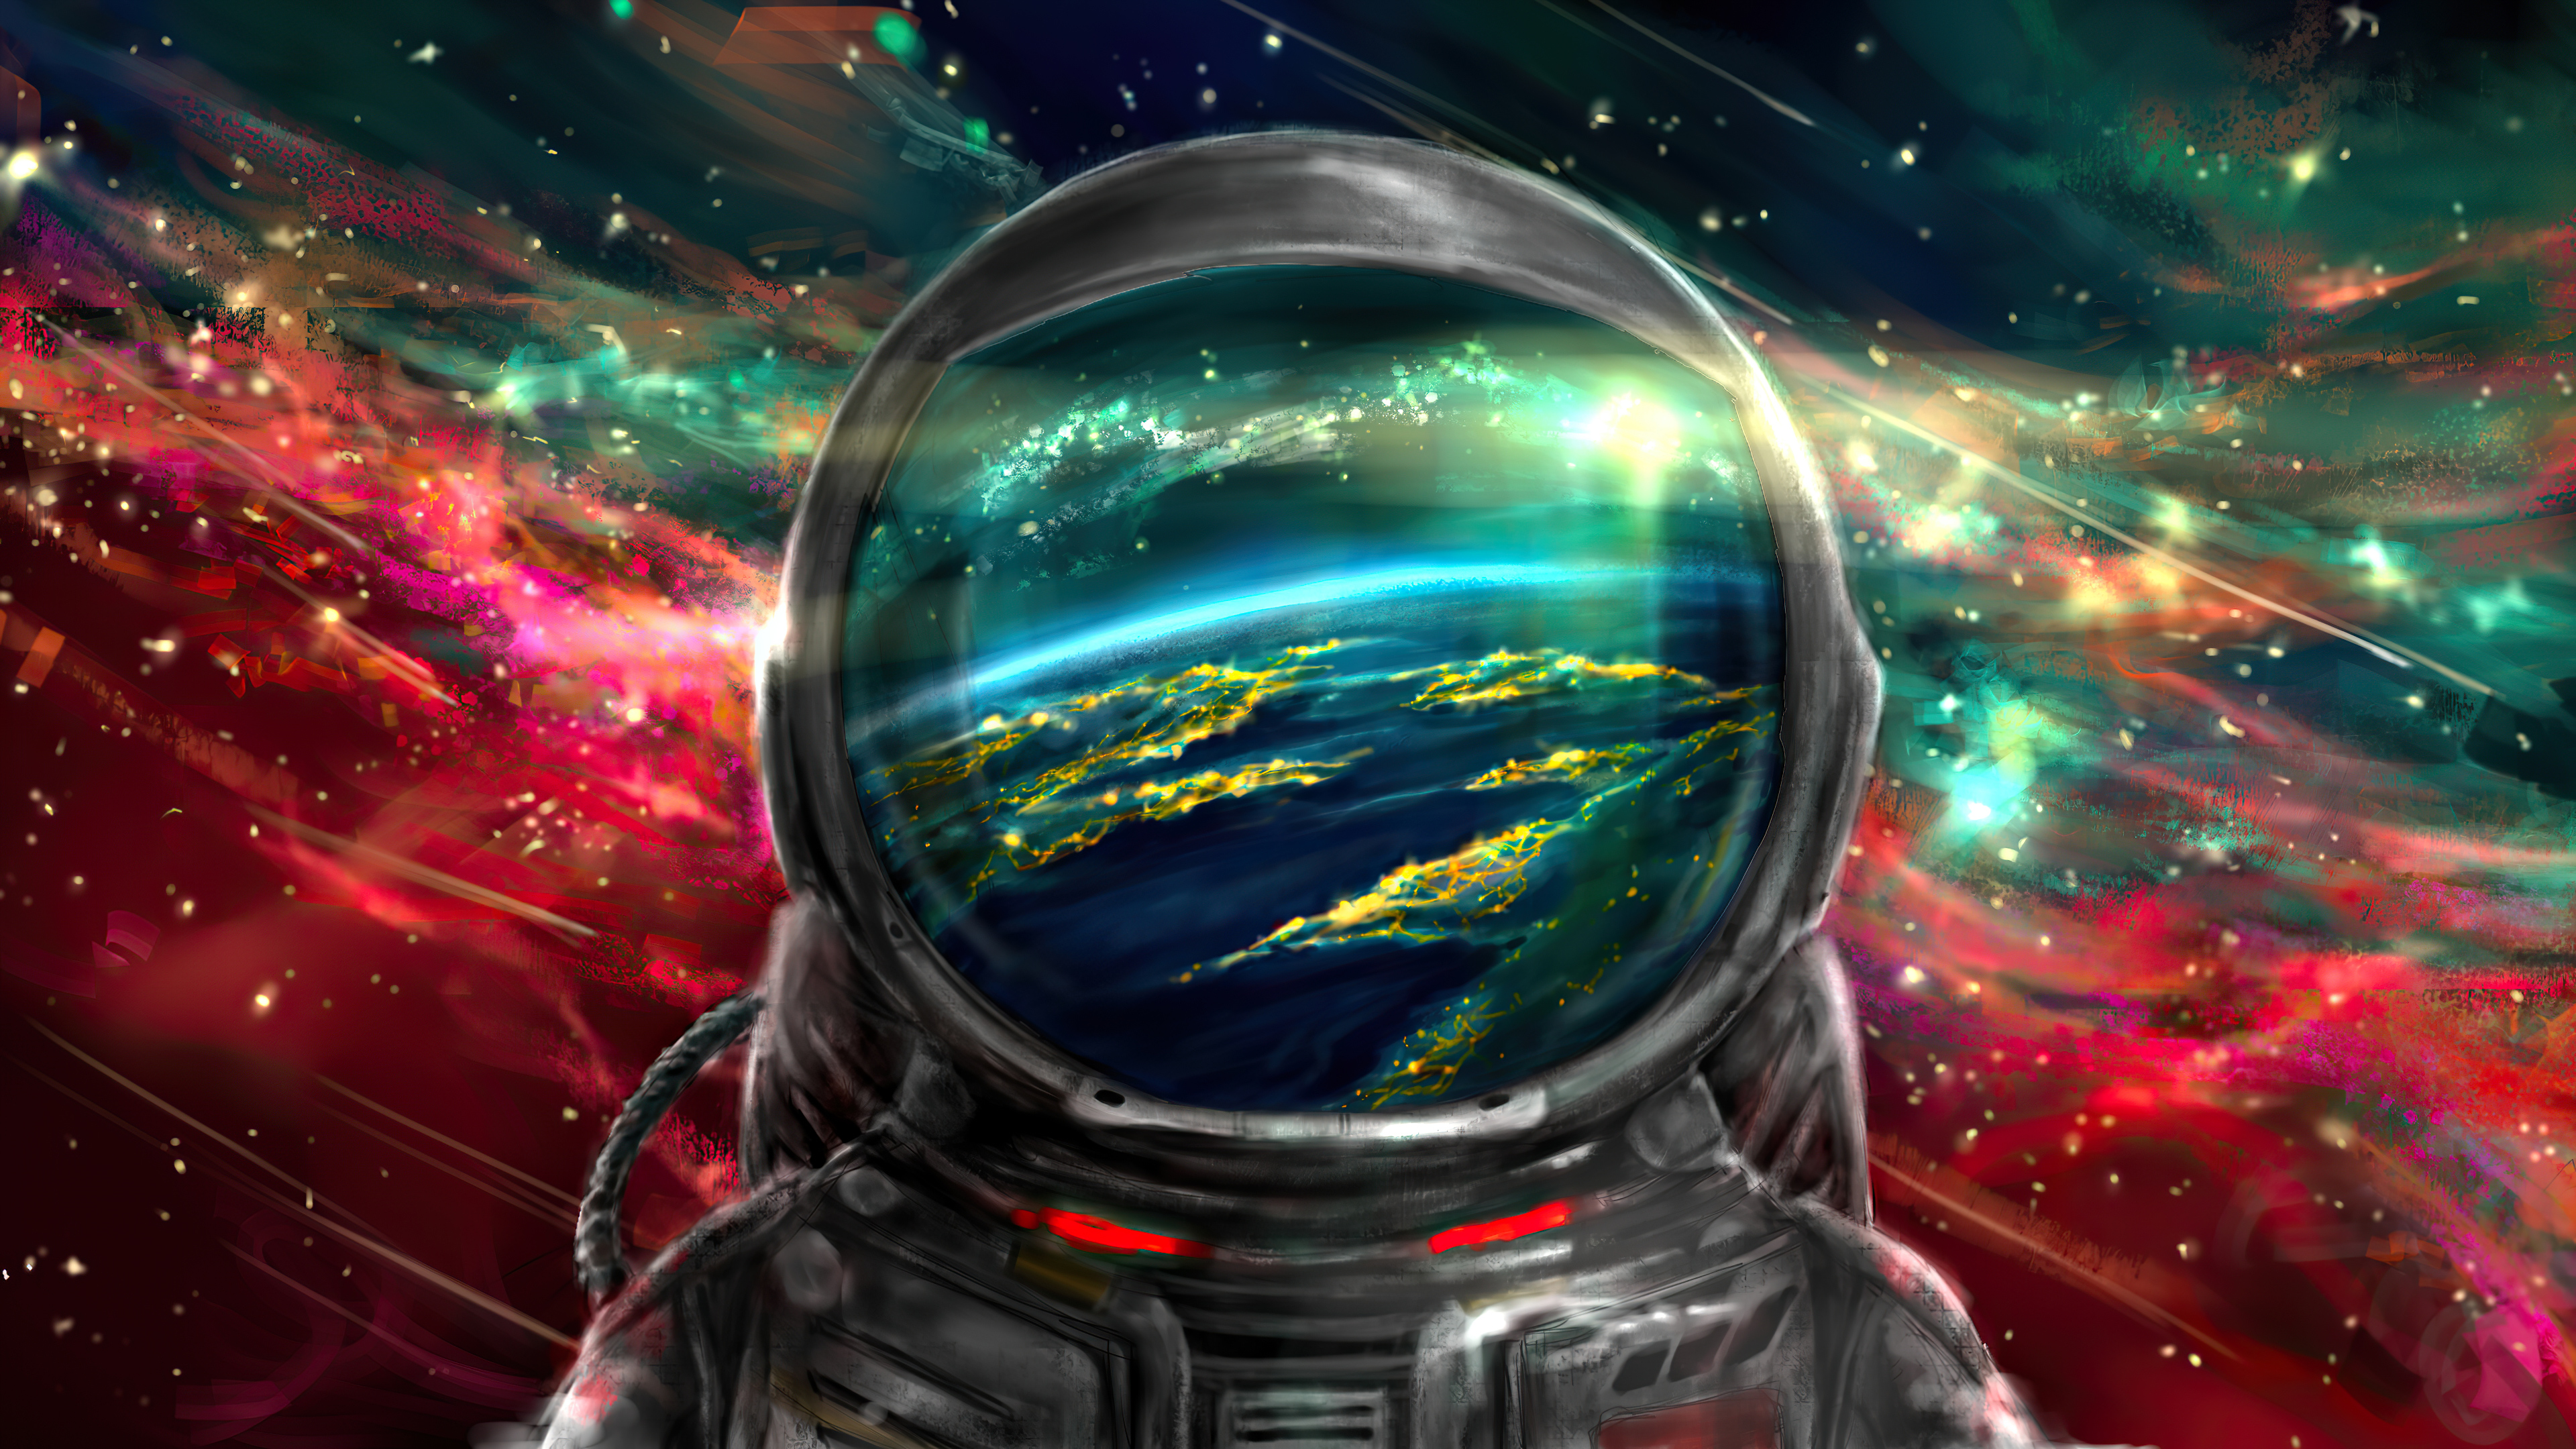 Astronaut with universe in the background Wallpaper 4k Ultra HD ID:5544